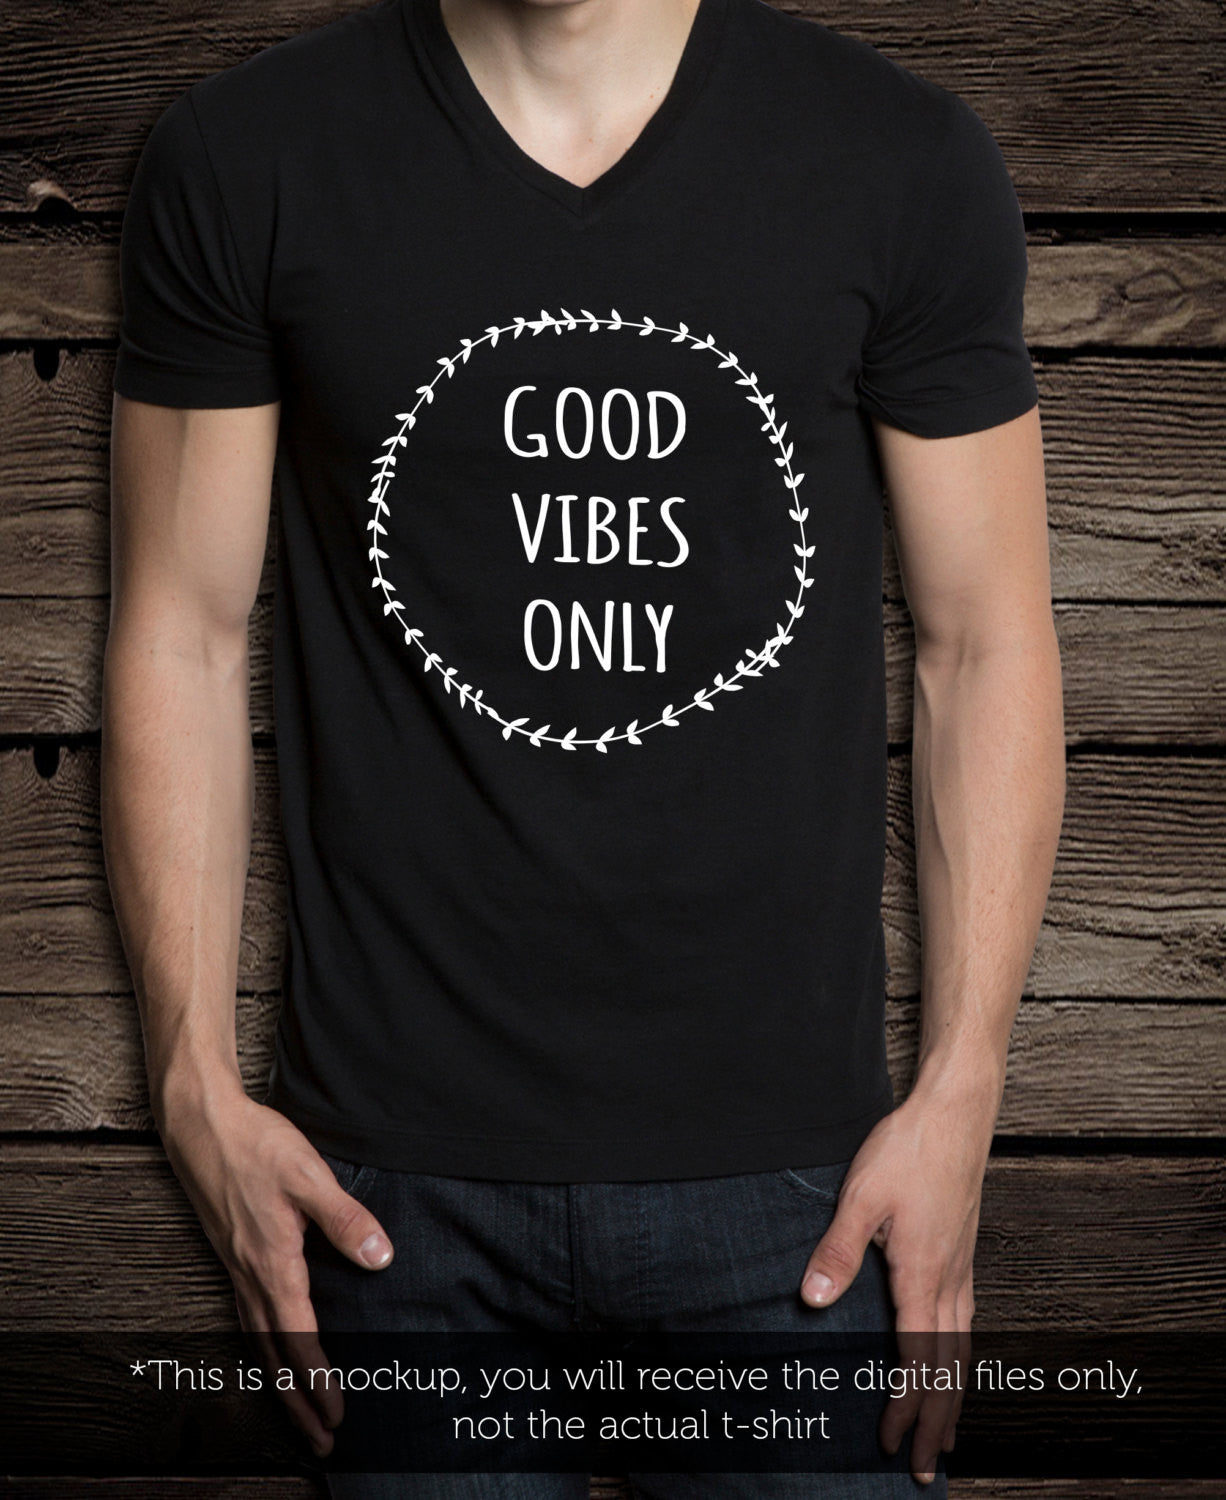 Good vibes only SVG file Cutting File Clipart in Svg, Eps, Dxf, Png for Cricut & Silhouette - BlackCatsSVG